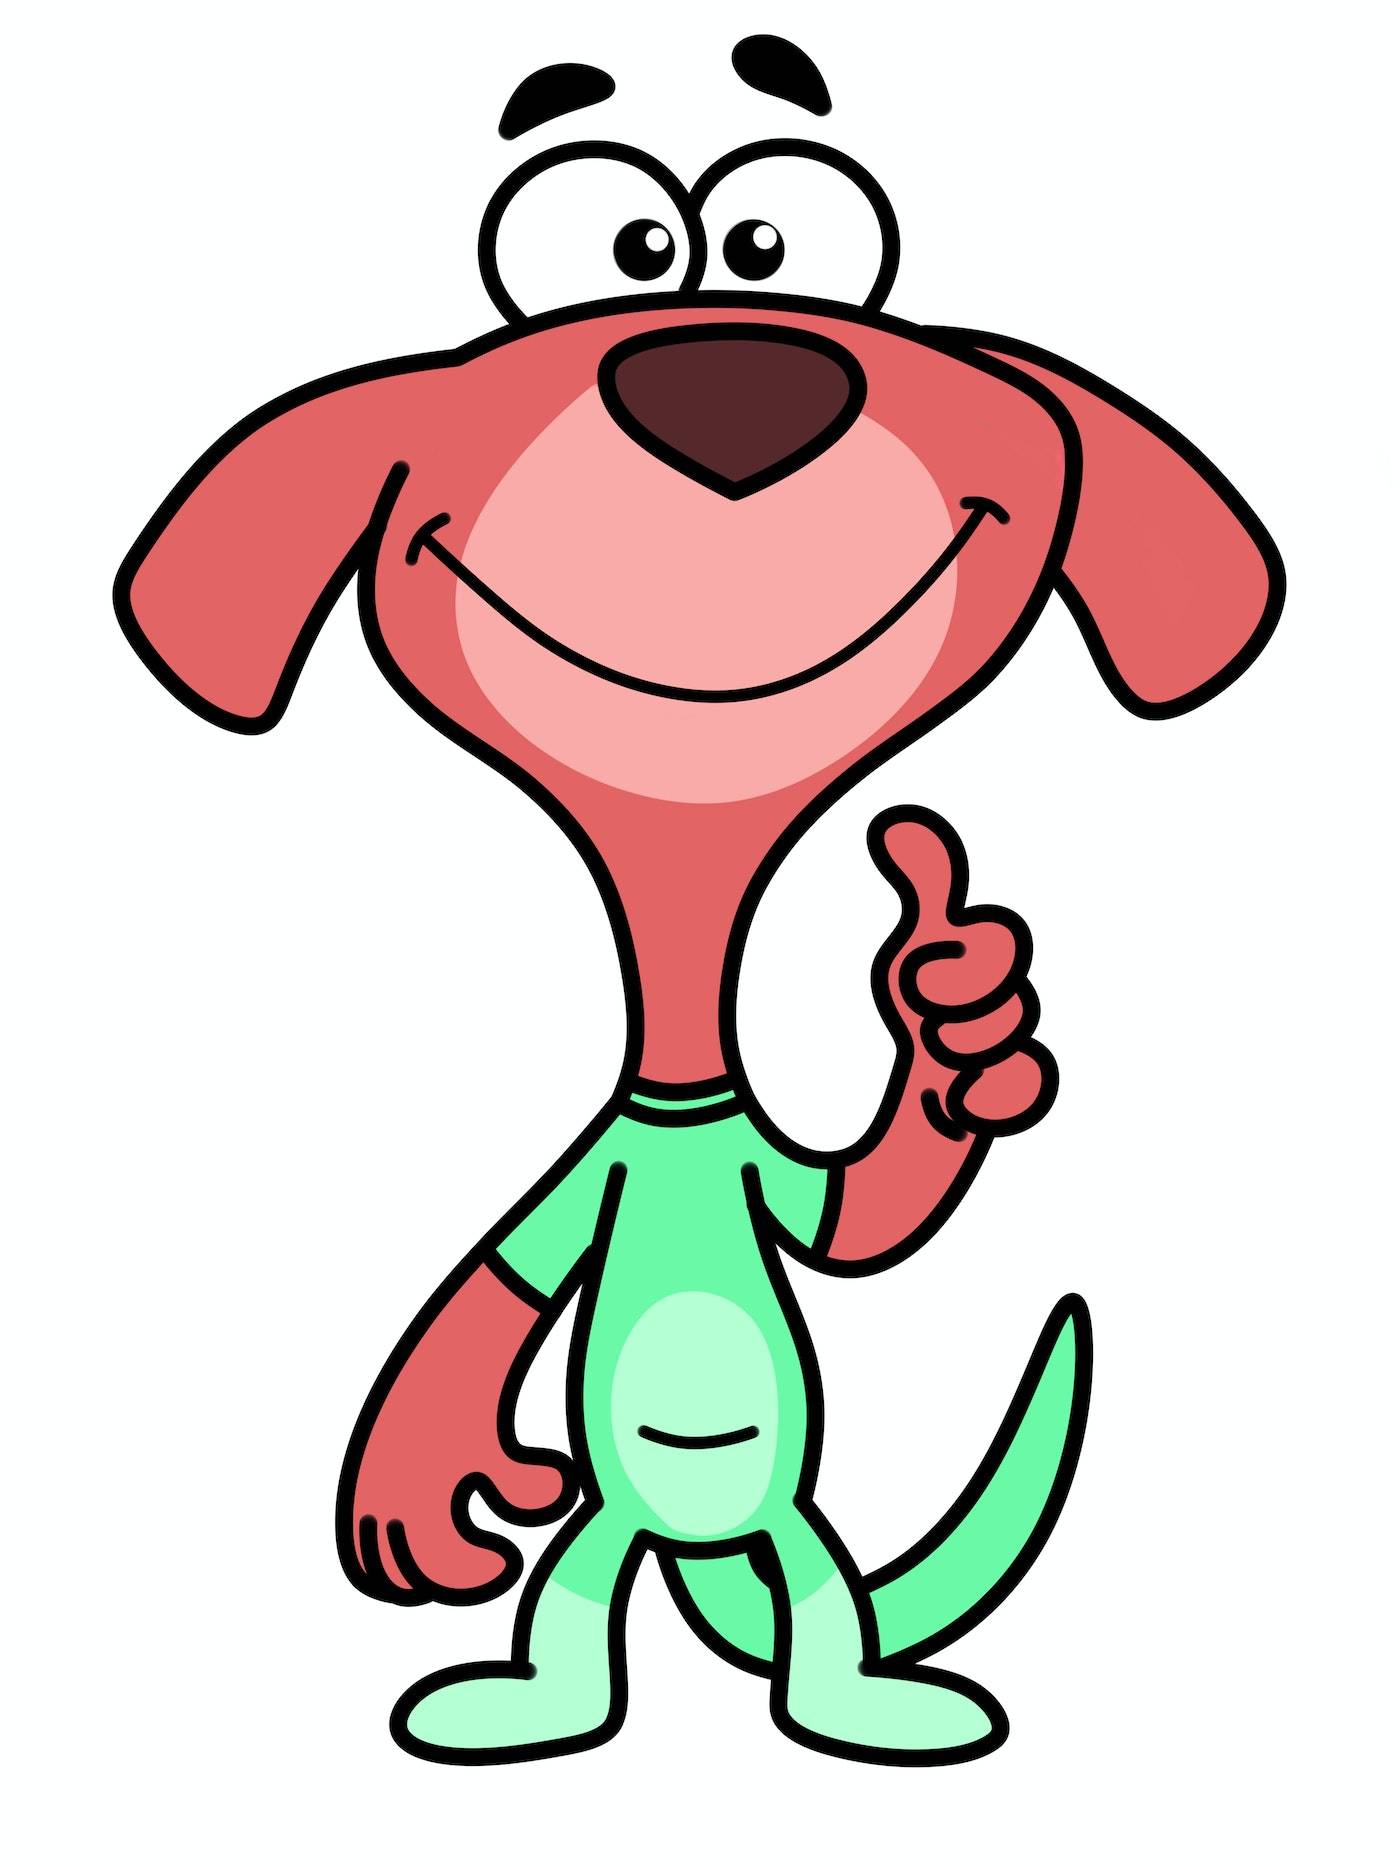 Doggy Don by Goldnation221 on DeviantArt